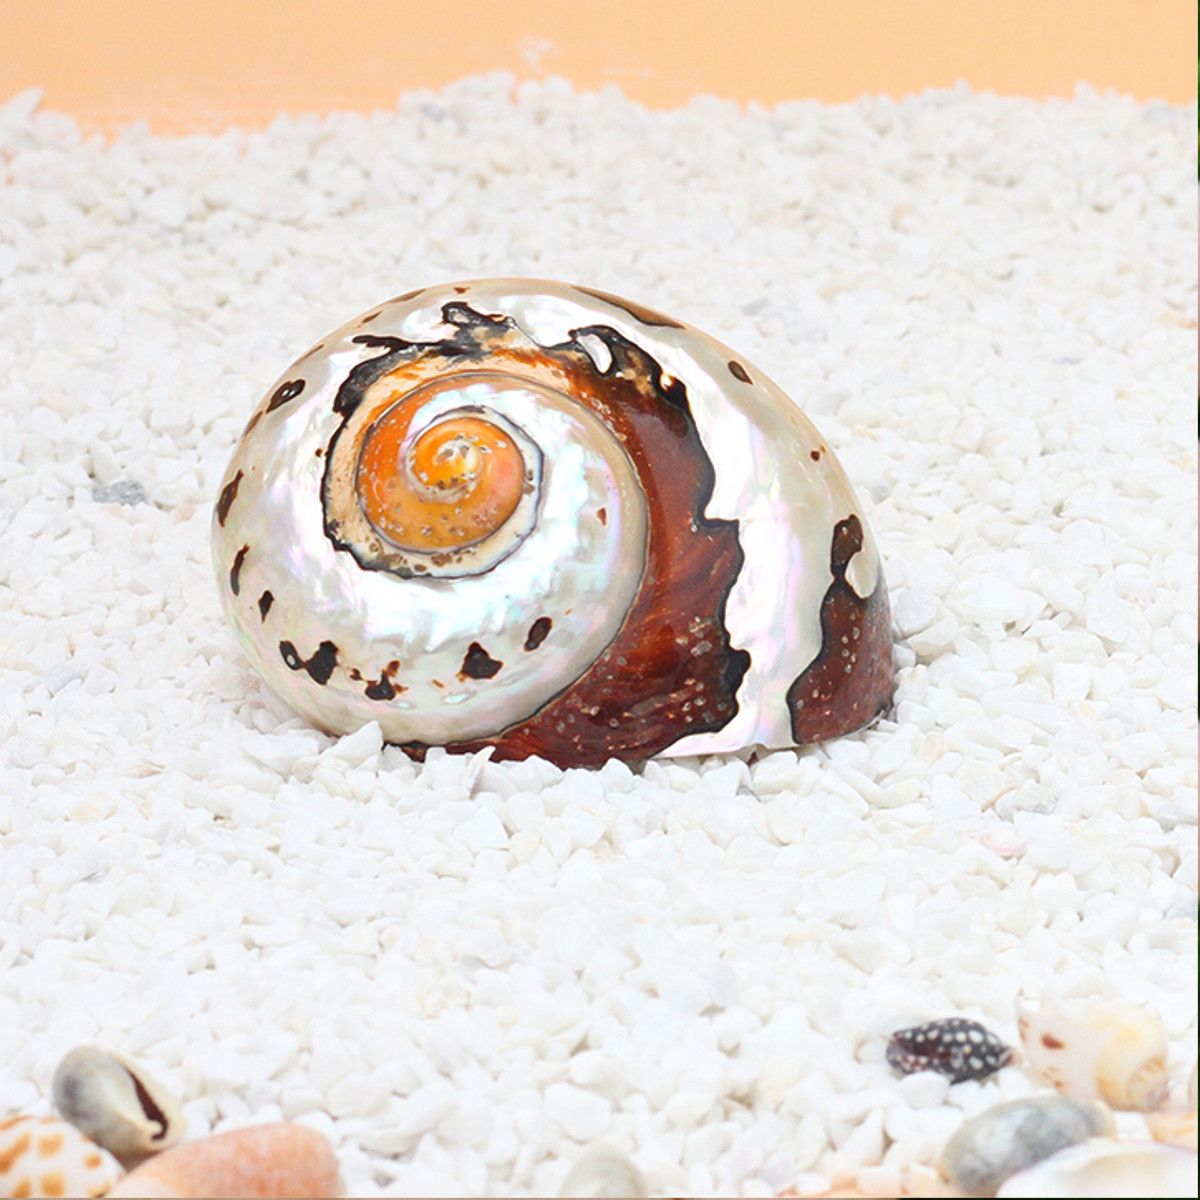 6-95cm-Natural-African-Turban-Sea-Shell-Coral-Conch-Snail-Home-Fish-Tank-Decorations-1537994